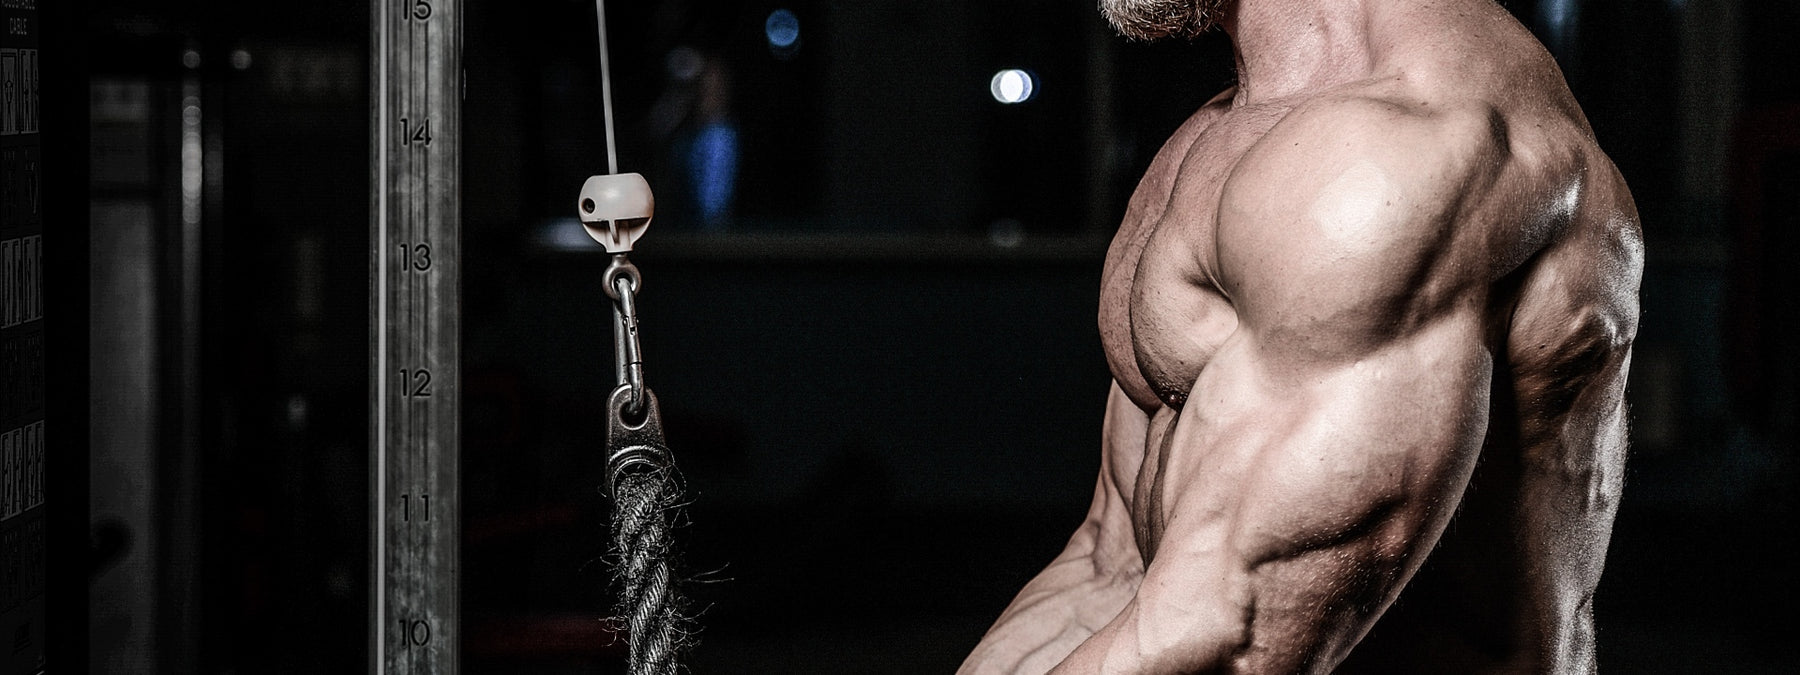 How to Grow the 5 Toughest Muscle Groups